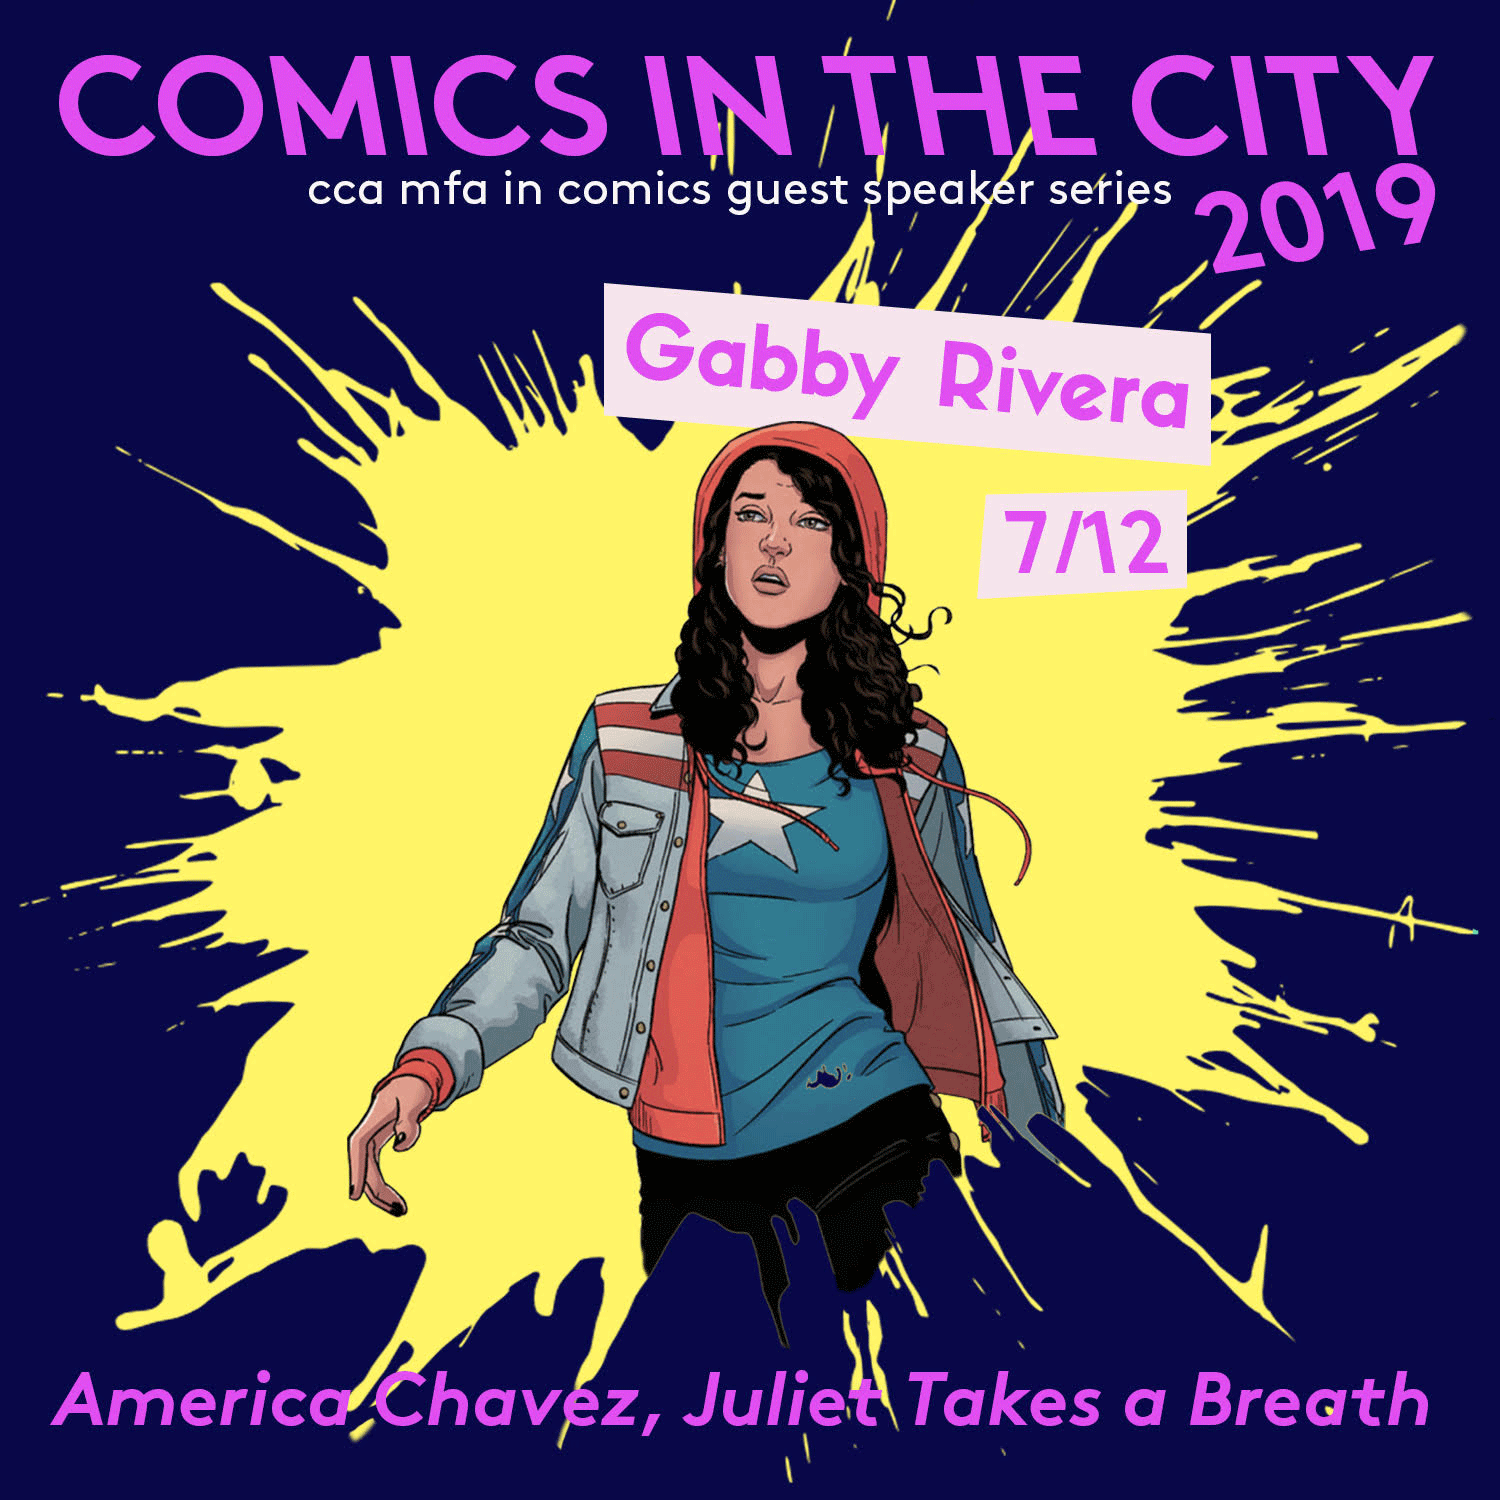 Comics in the City 2019 featuring Gabby Rivera Poster_Events_NP